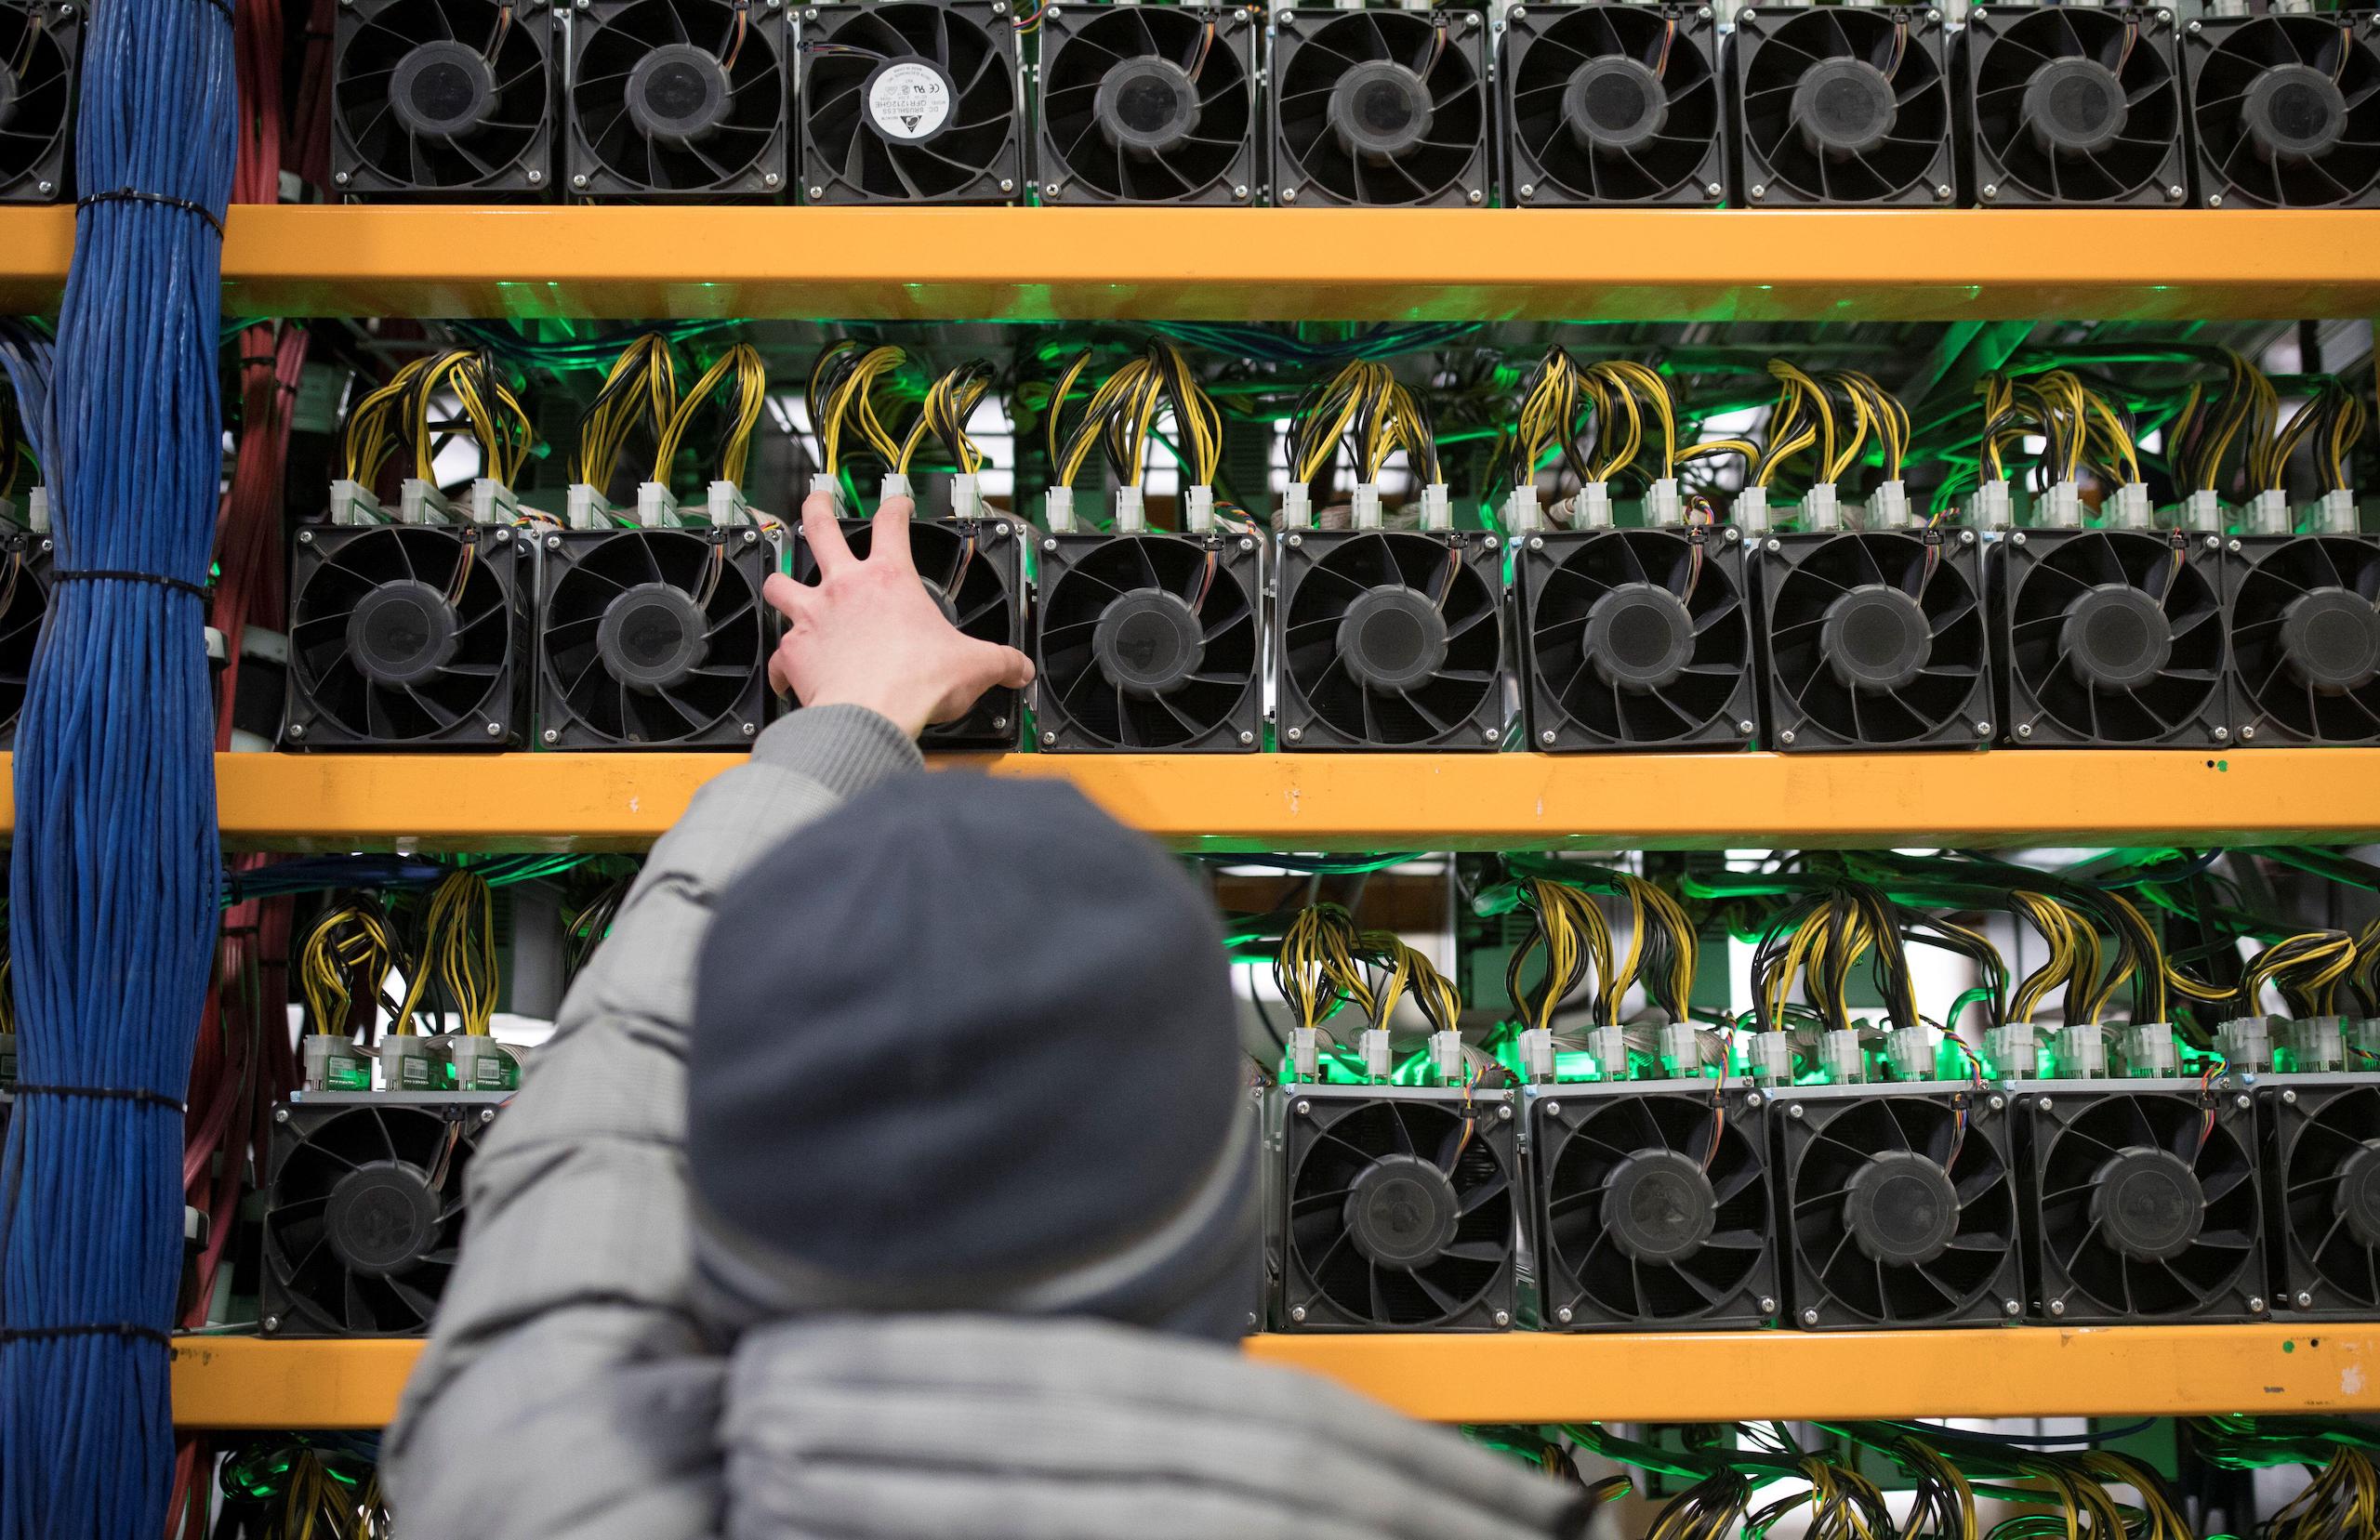 Antminer - ASIC Miner Latest Price, Manufacturers & Suppliers